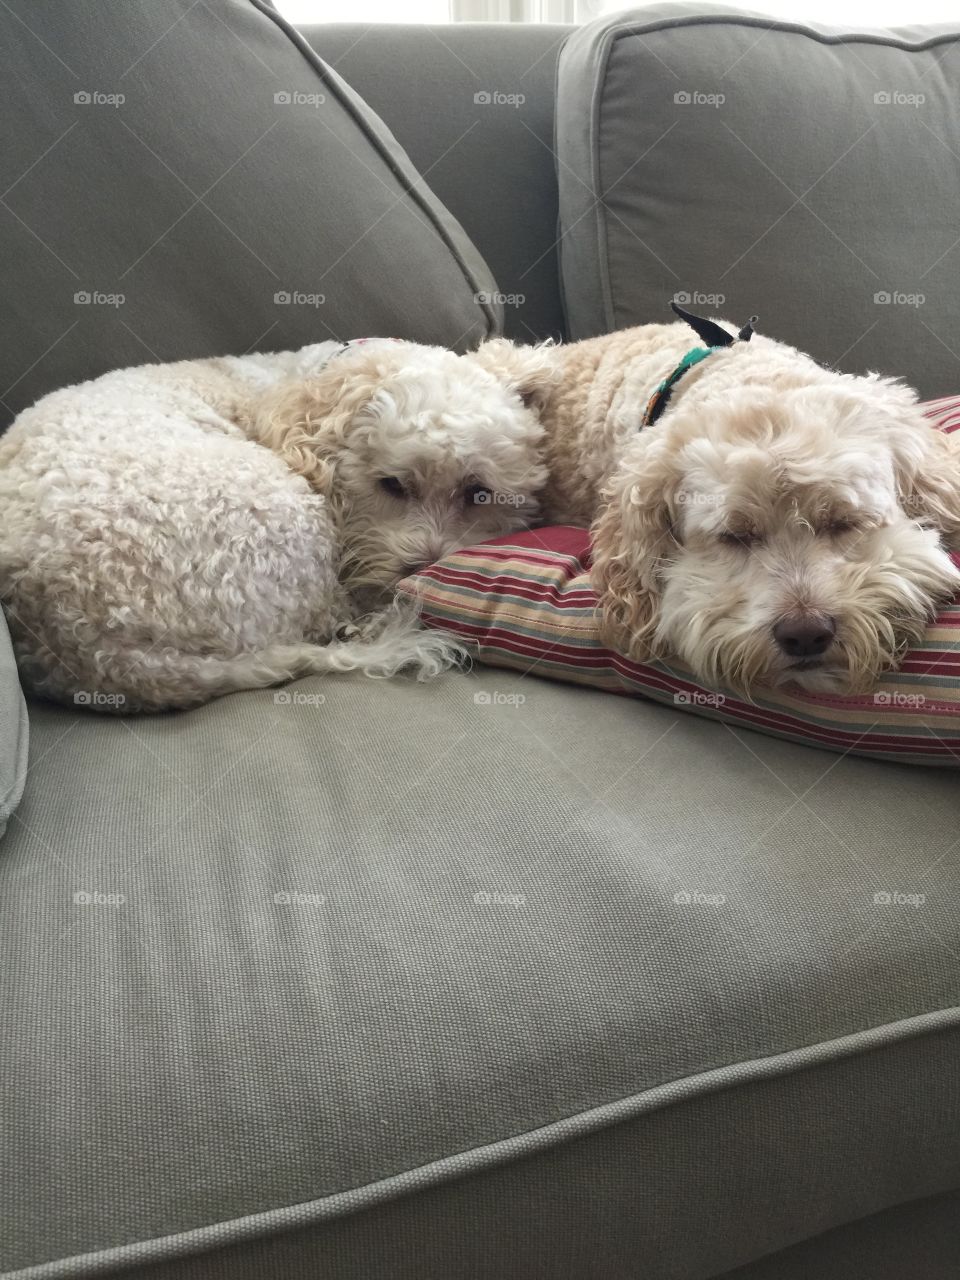 Cockapoo puppies taking a rest on the couch. 